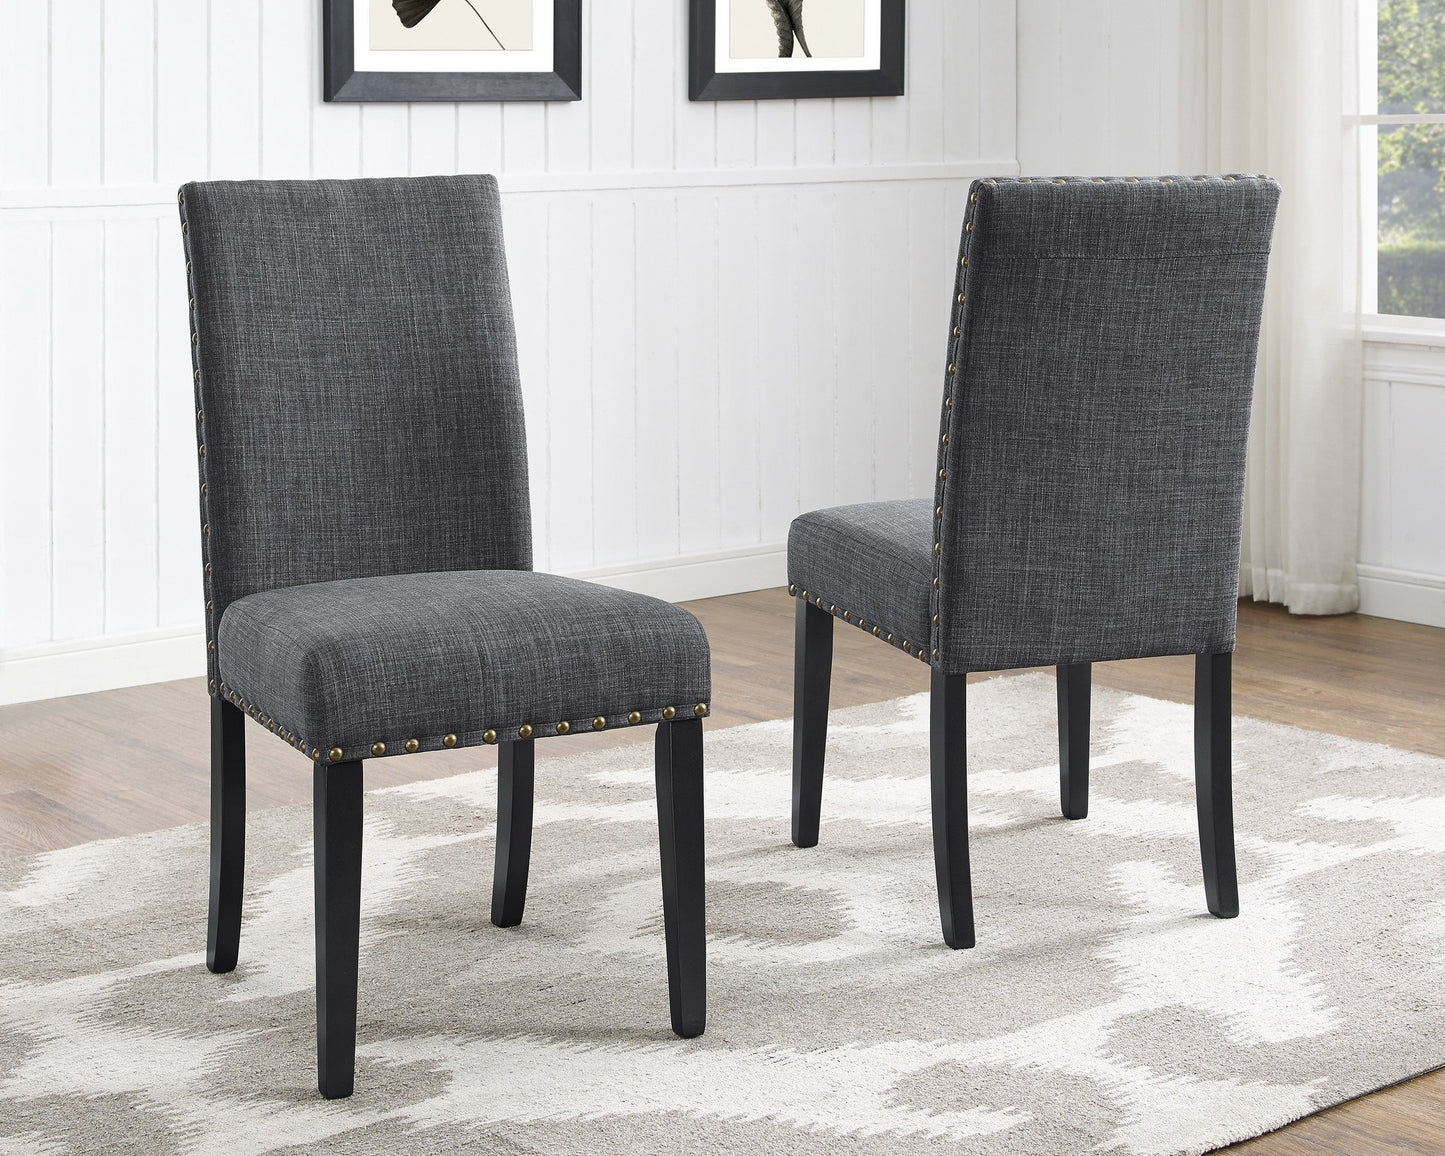 Biony Espresso Wood Dining Set with Gray Fabric Nailhead Chairs